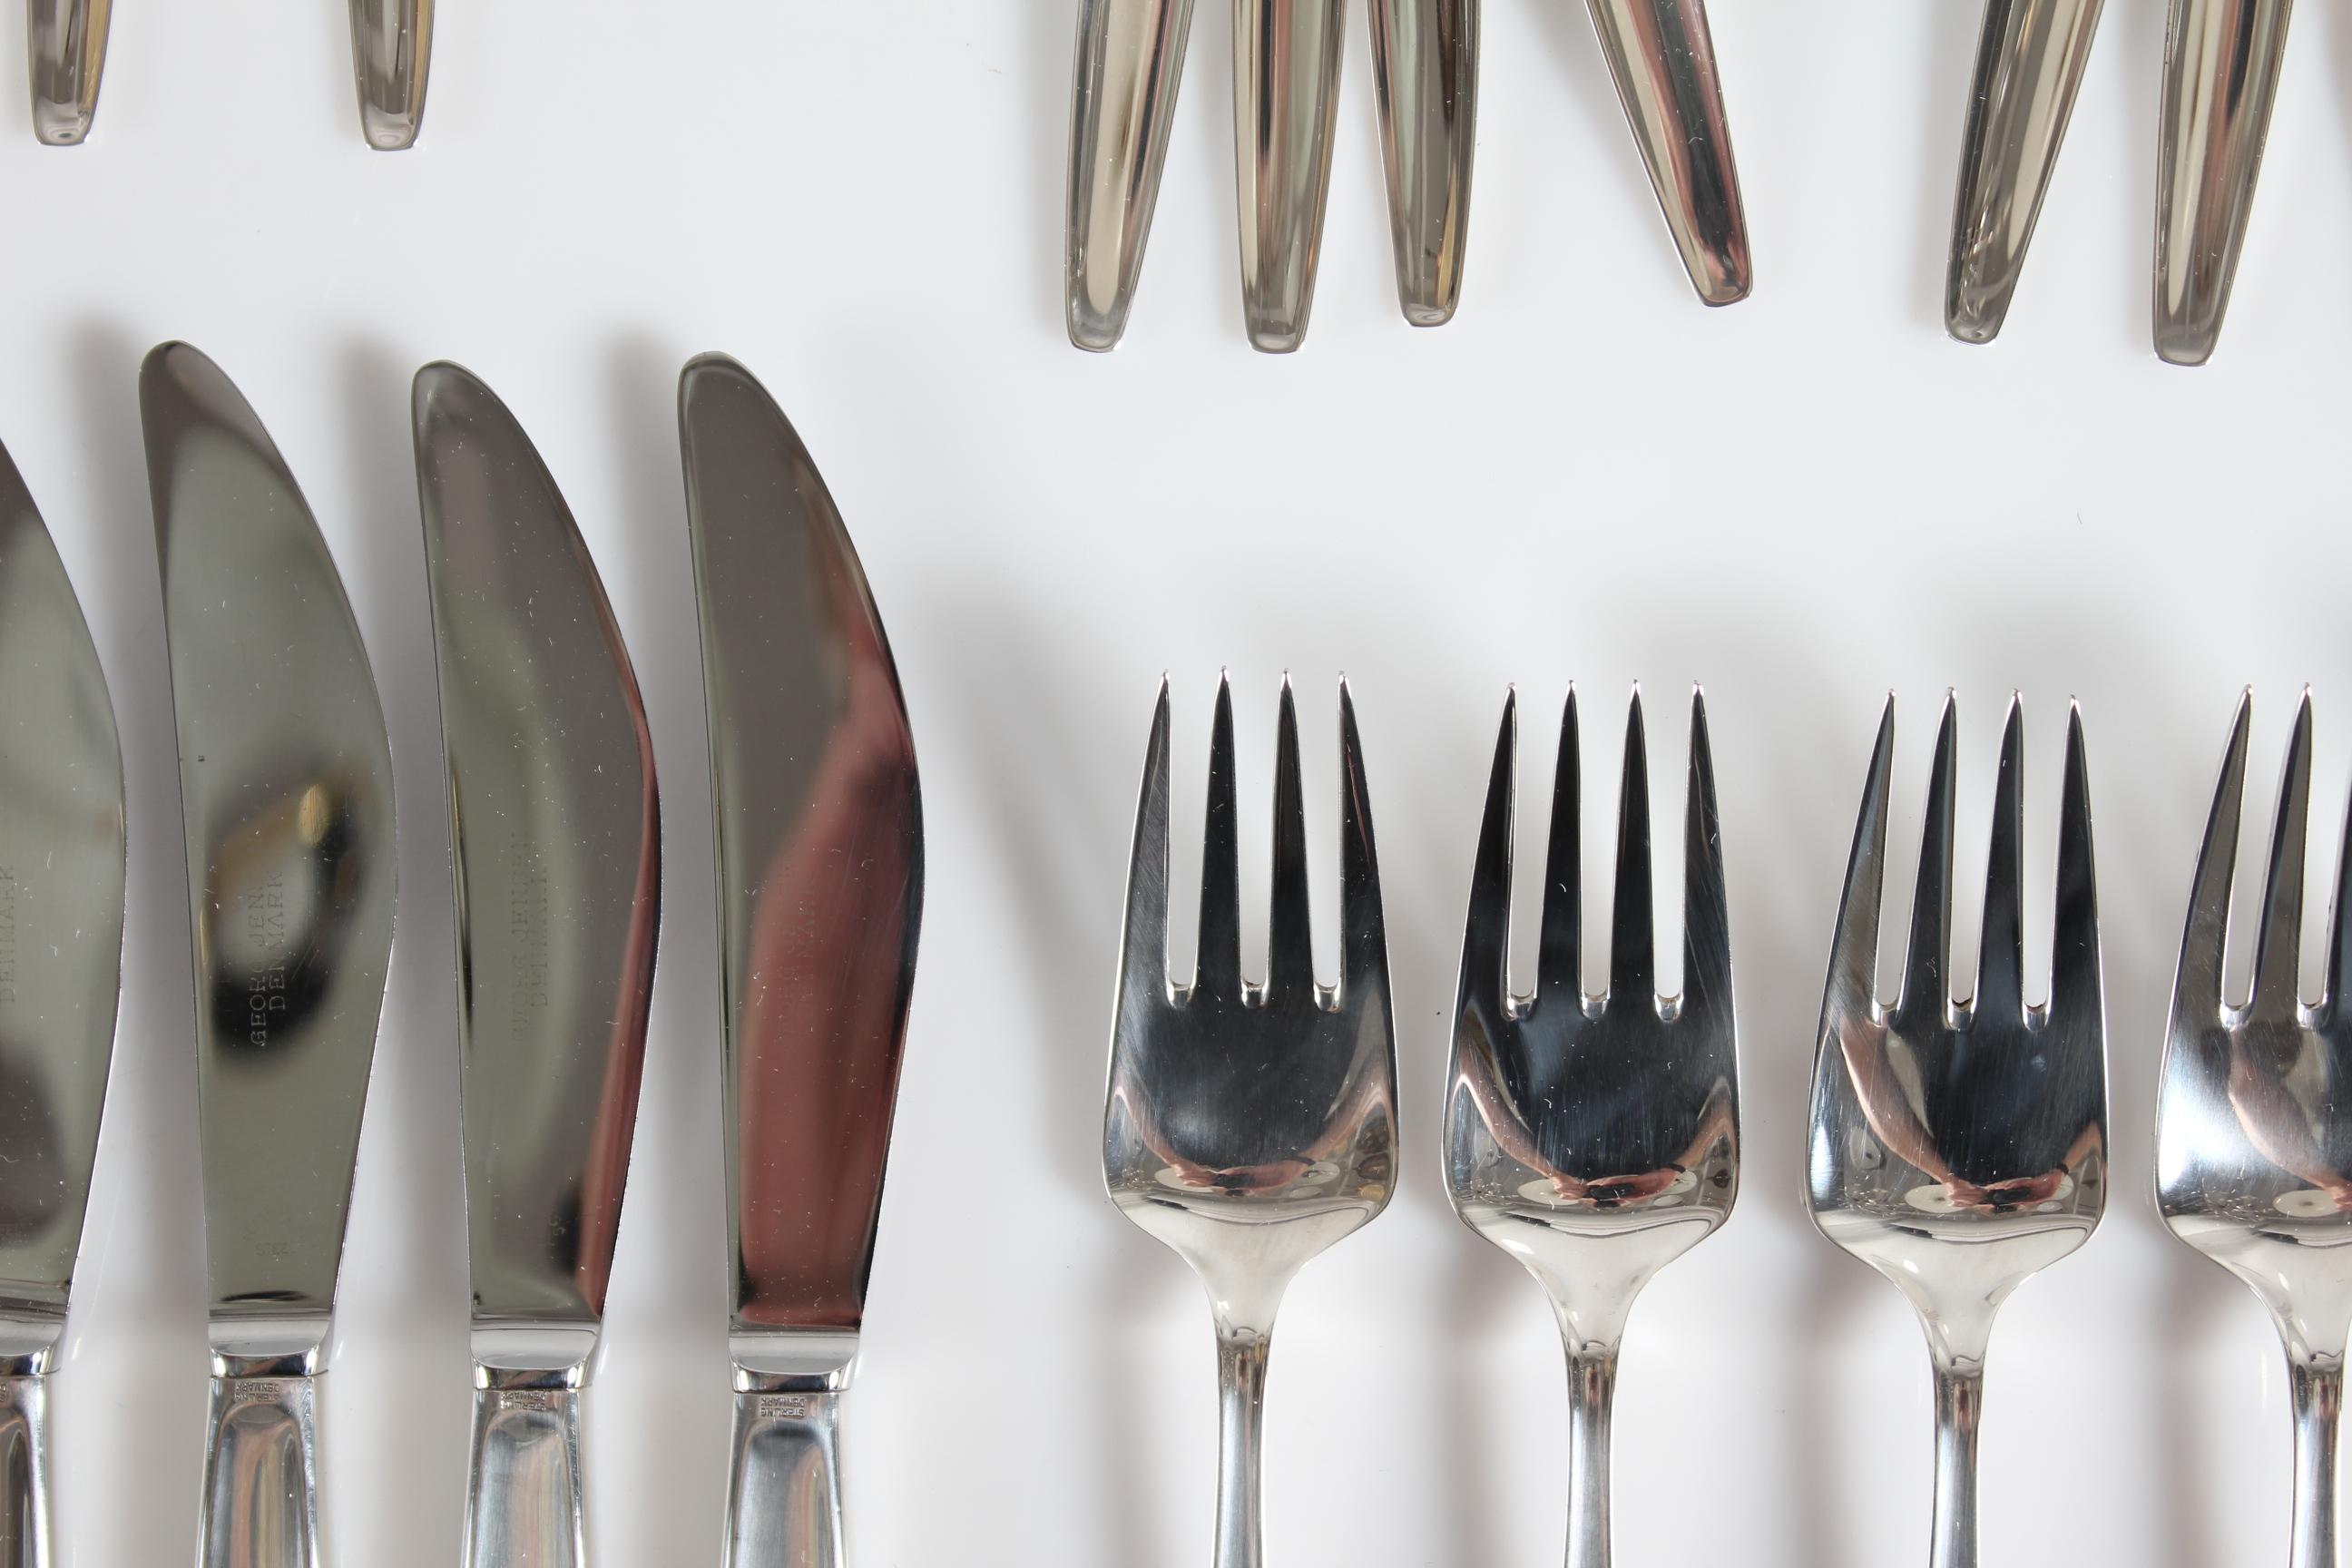 Georg Jensen silver Denmark Cypres cutlery set for 8 persons in sterling silver designed by Tias Eckhoff in 1952.

The set includes:
8 dining knives, length 22.3 cm
8 dining forks, length 19 cm 
8 dining spoons, length 19.5 cm
8 cake forks,